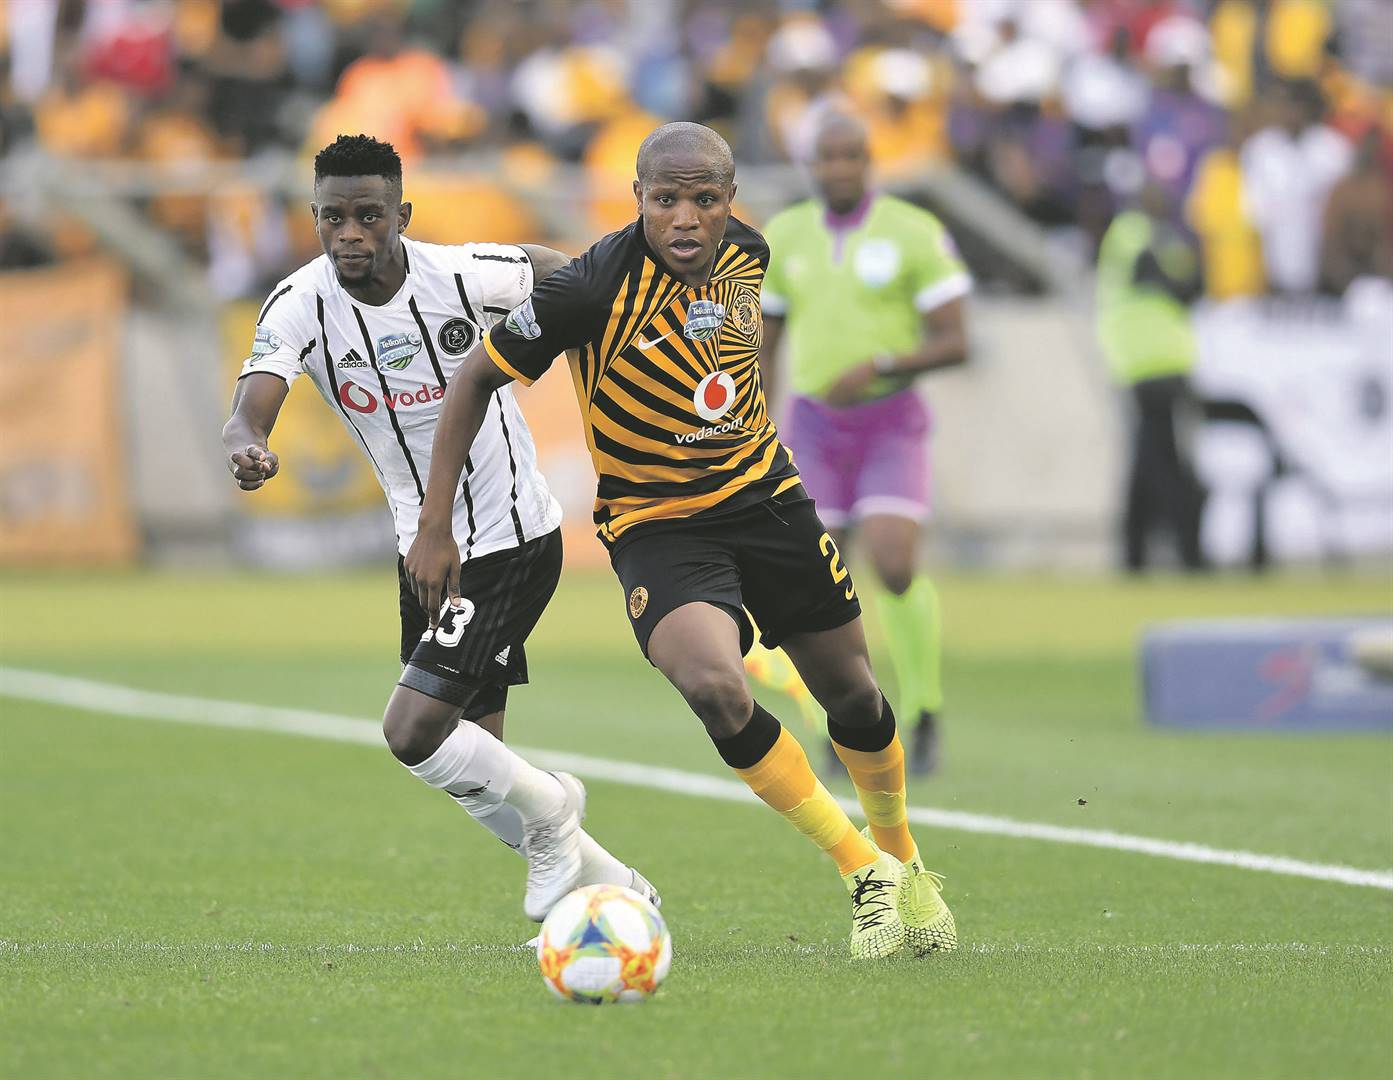 Lebogang Manyama of Kaizer Chiefs and Innocent Maela of Orlando Pirates during the Telkom Knockout quarter-final match between the two teamsat Moses Mabhida Stadium on November 2 2019 in Durban. Picture: Anesh Debiky / Gallo Images